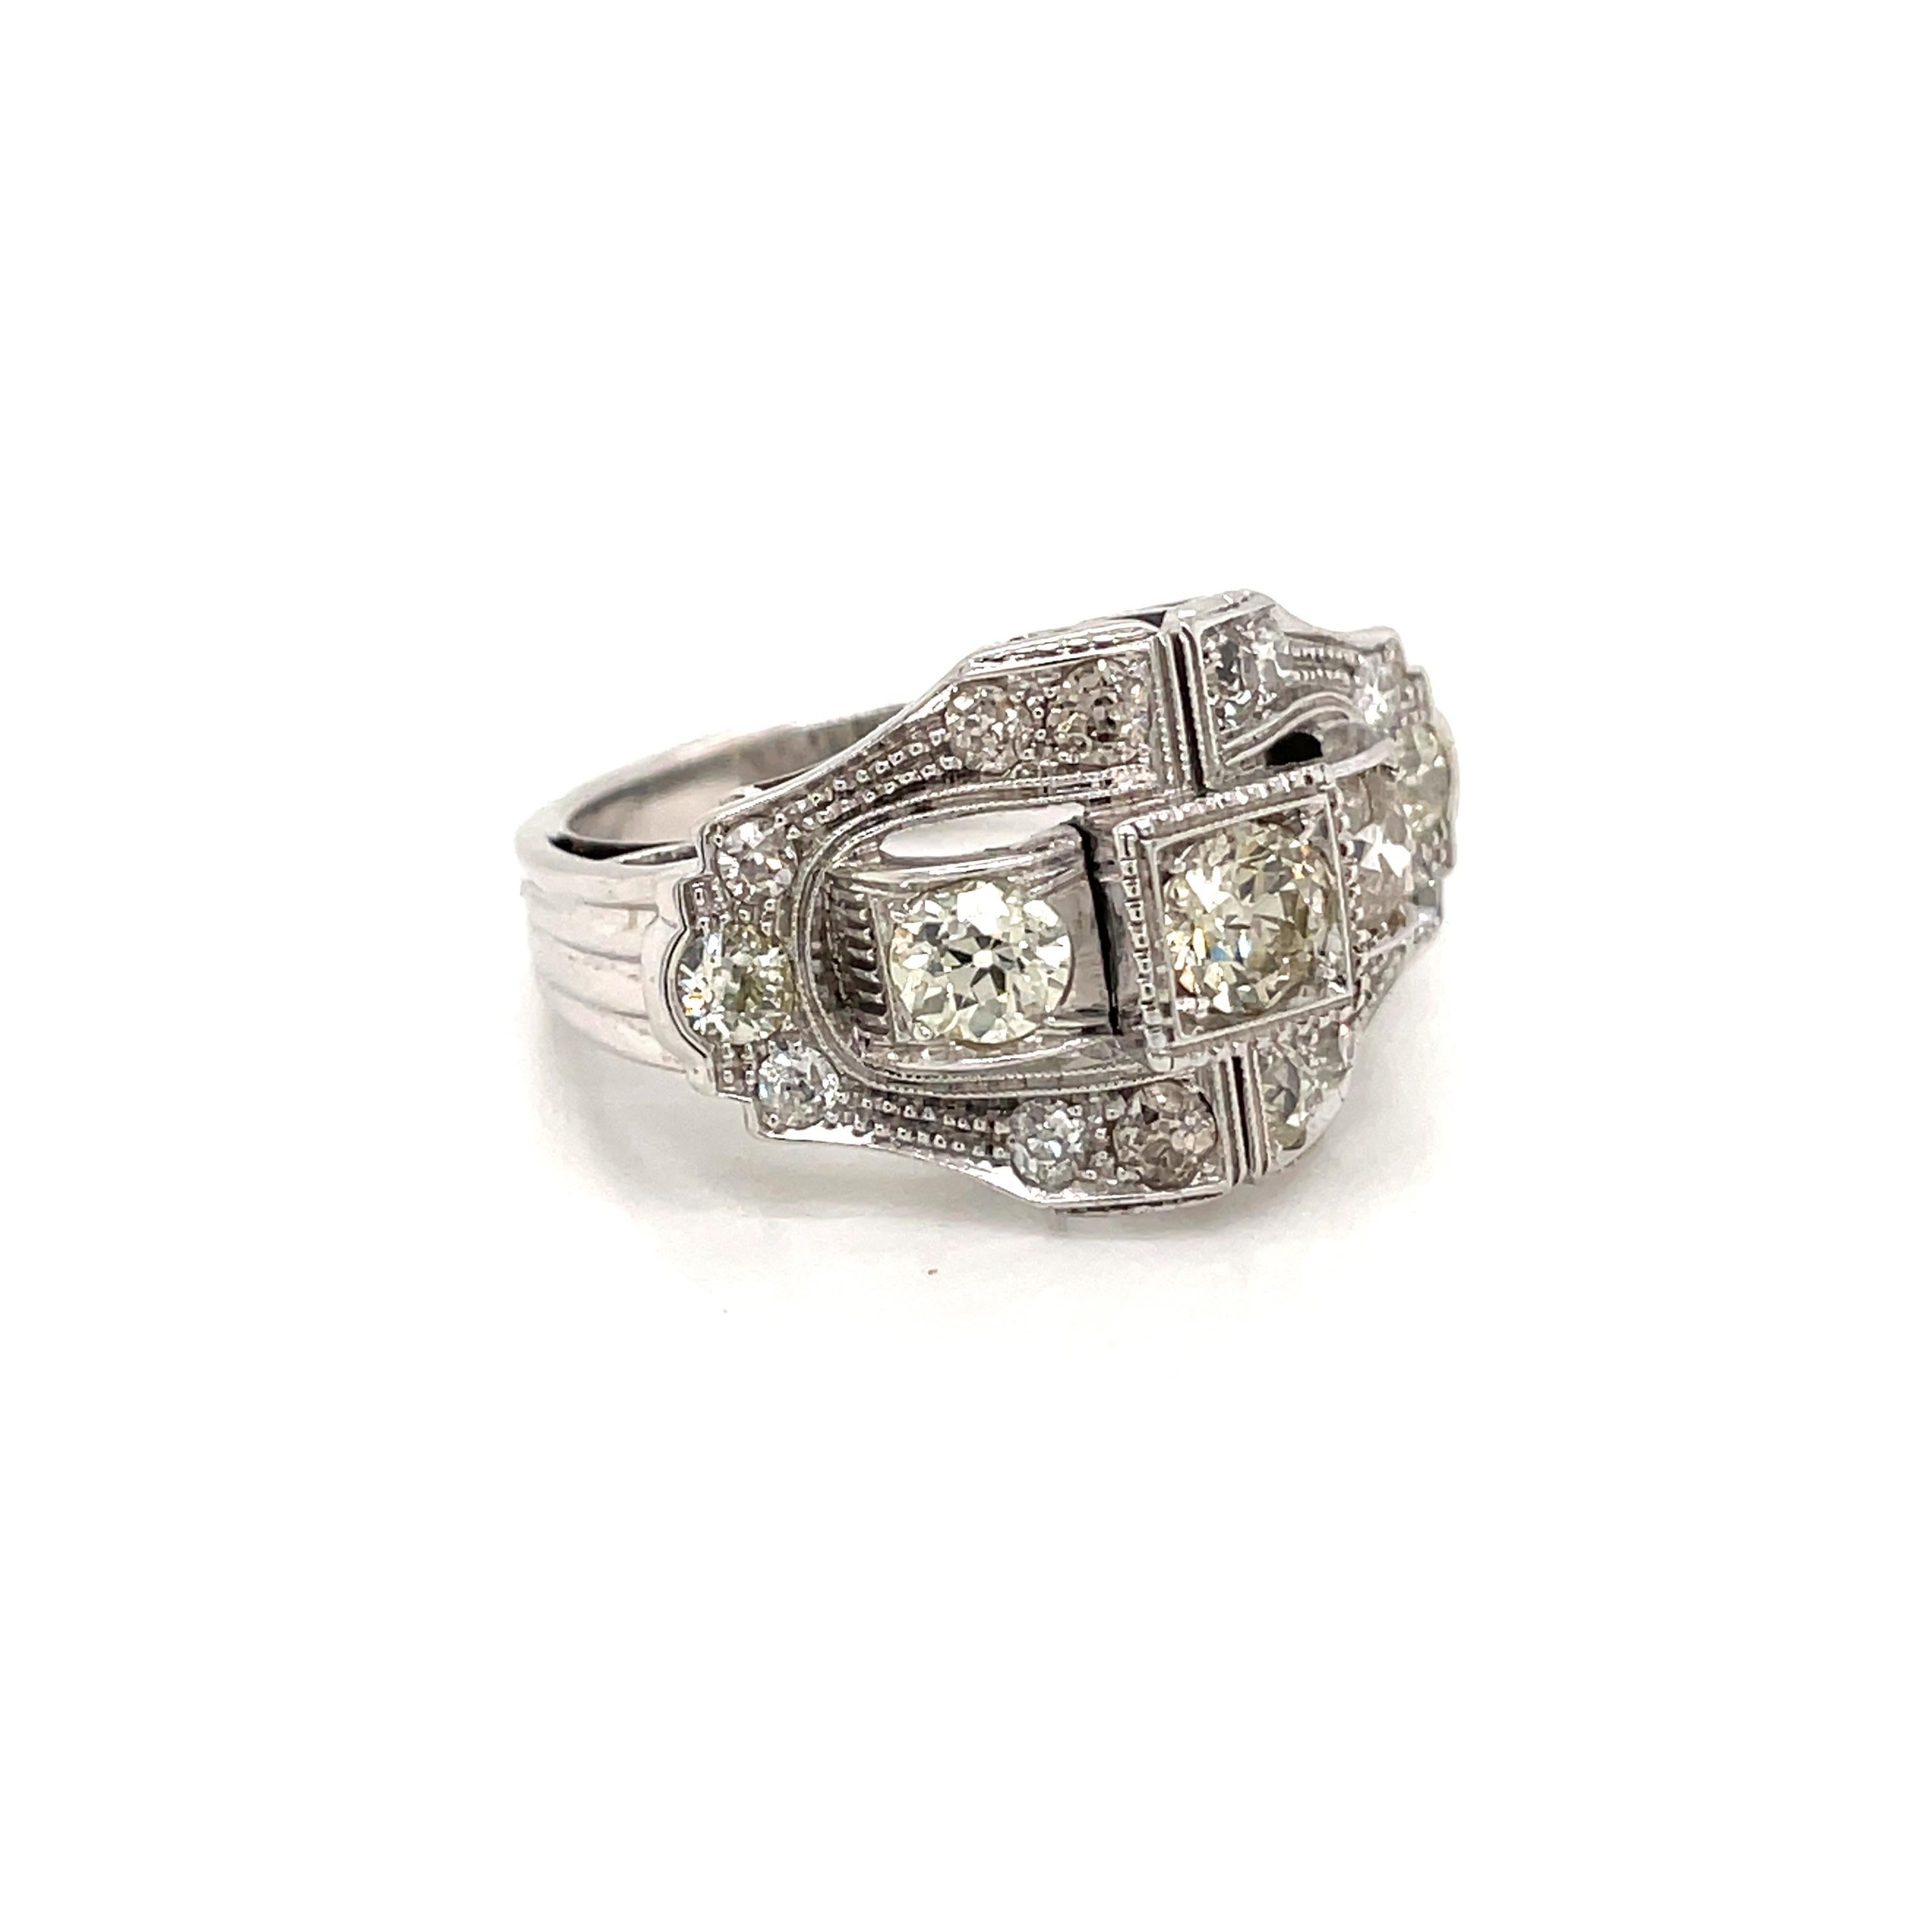 Authentic and rare Art Deco engagement ring set with old mine cut diamonds totaling approximately 2.50 carats, L color and VS clarity.
Entirely hand crafted in 18k gold, this beautiful ring dates to the 1930's.

CONDITION: Pre-owned -